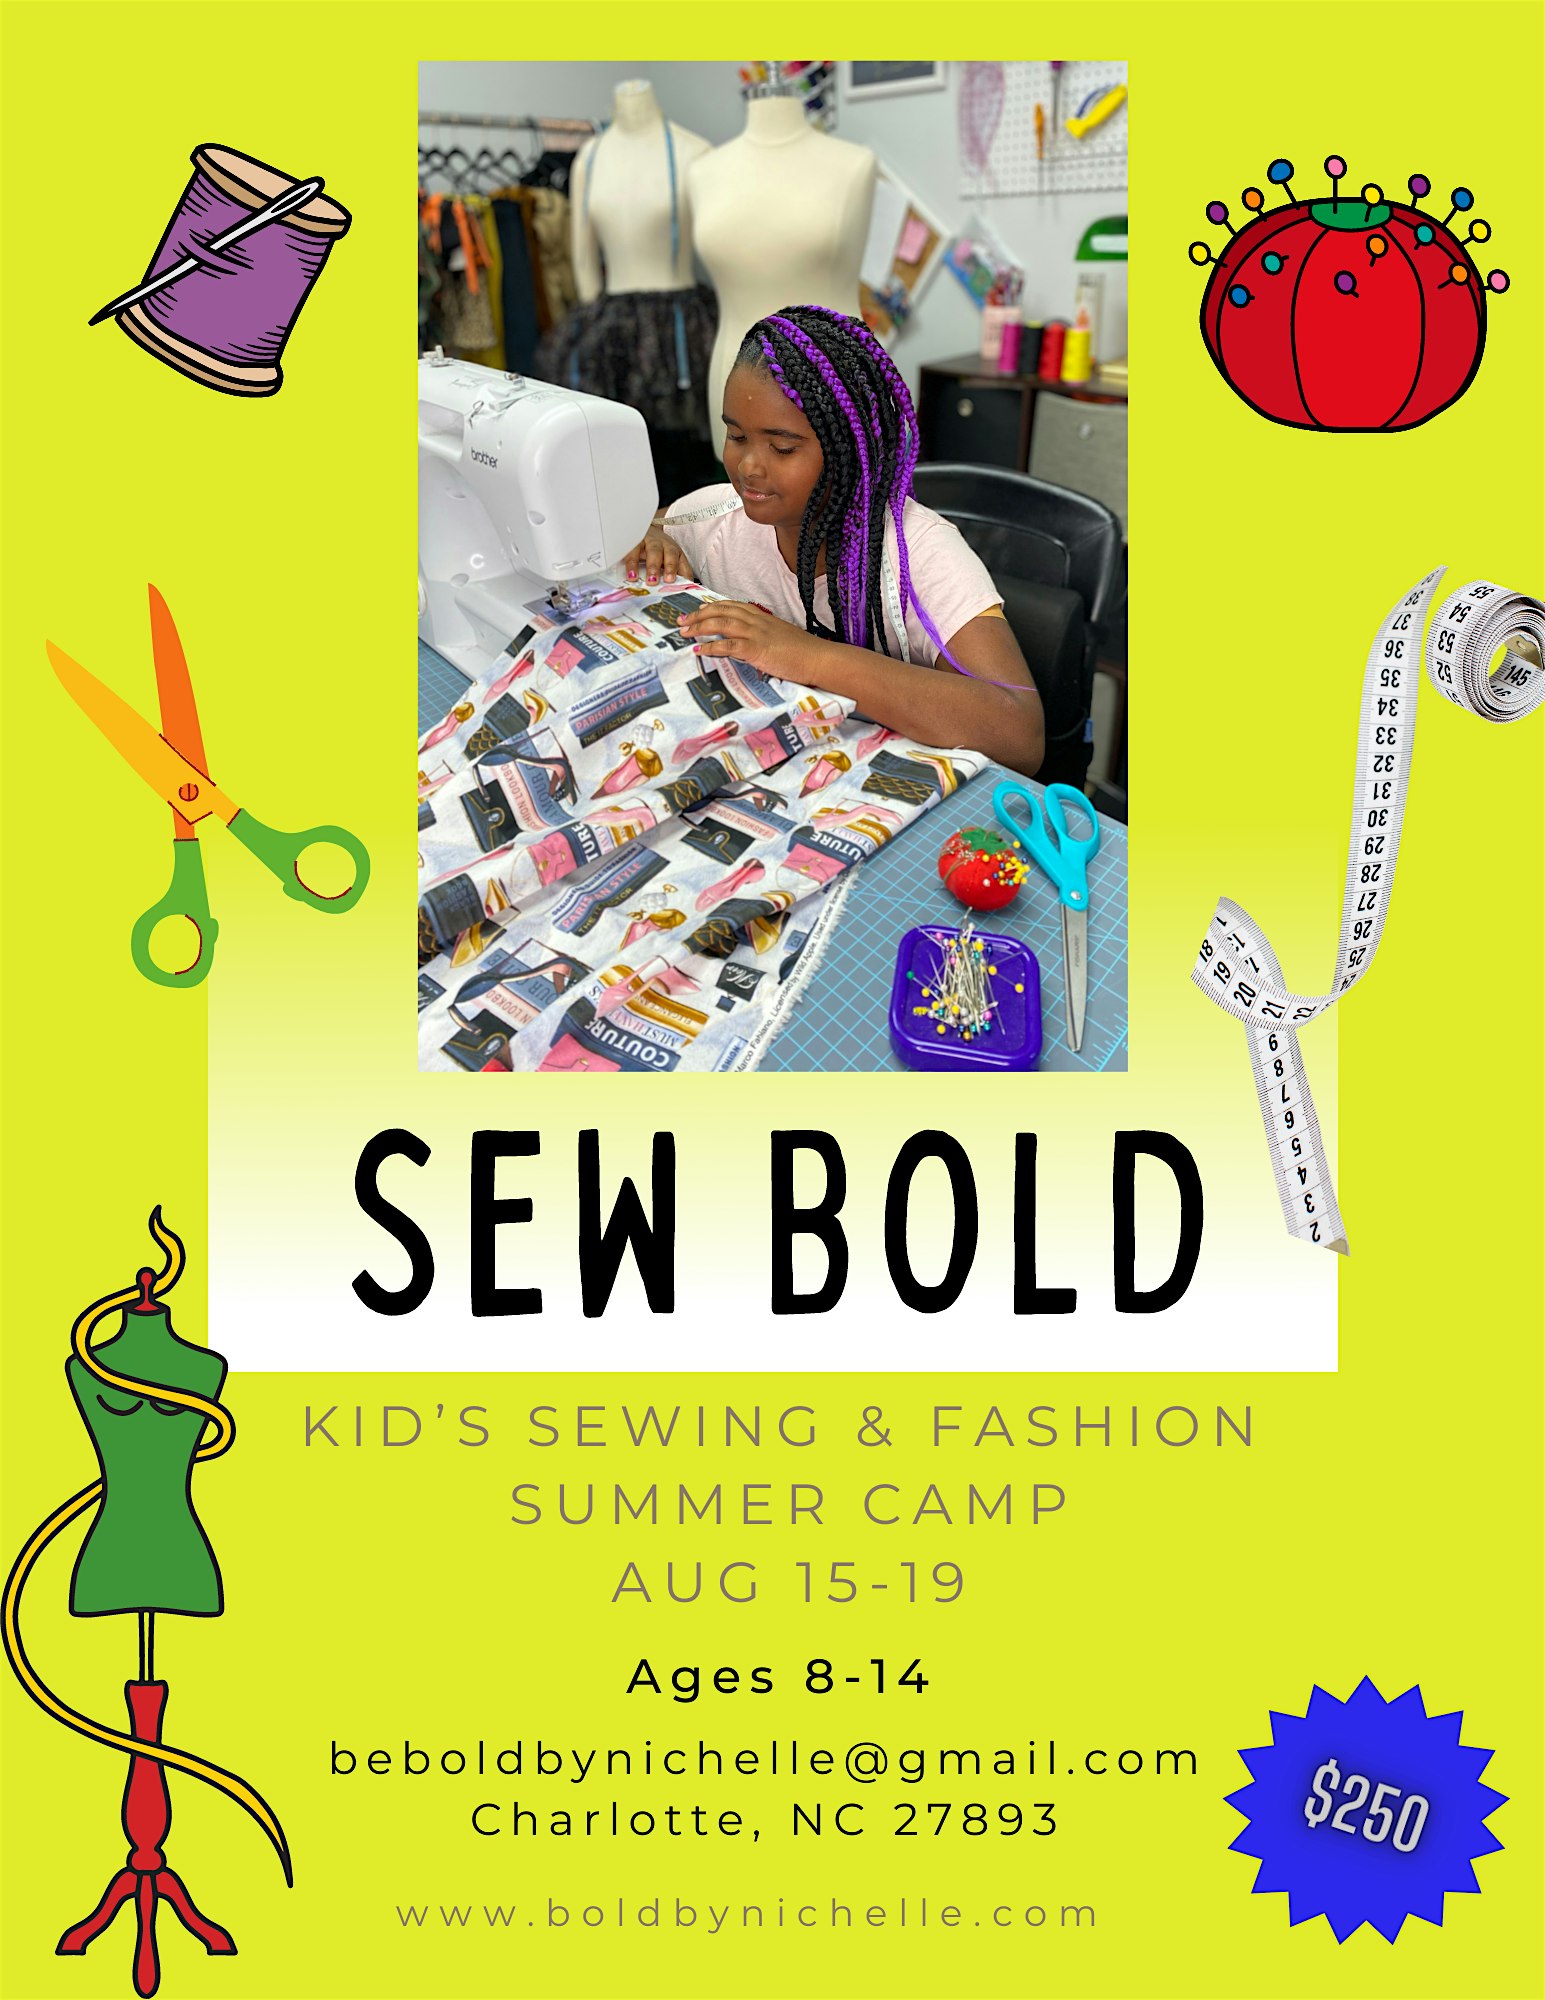 Sew Bold Kid's Sewing and Fashion Camp